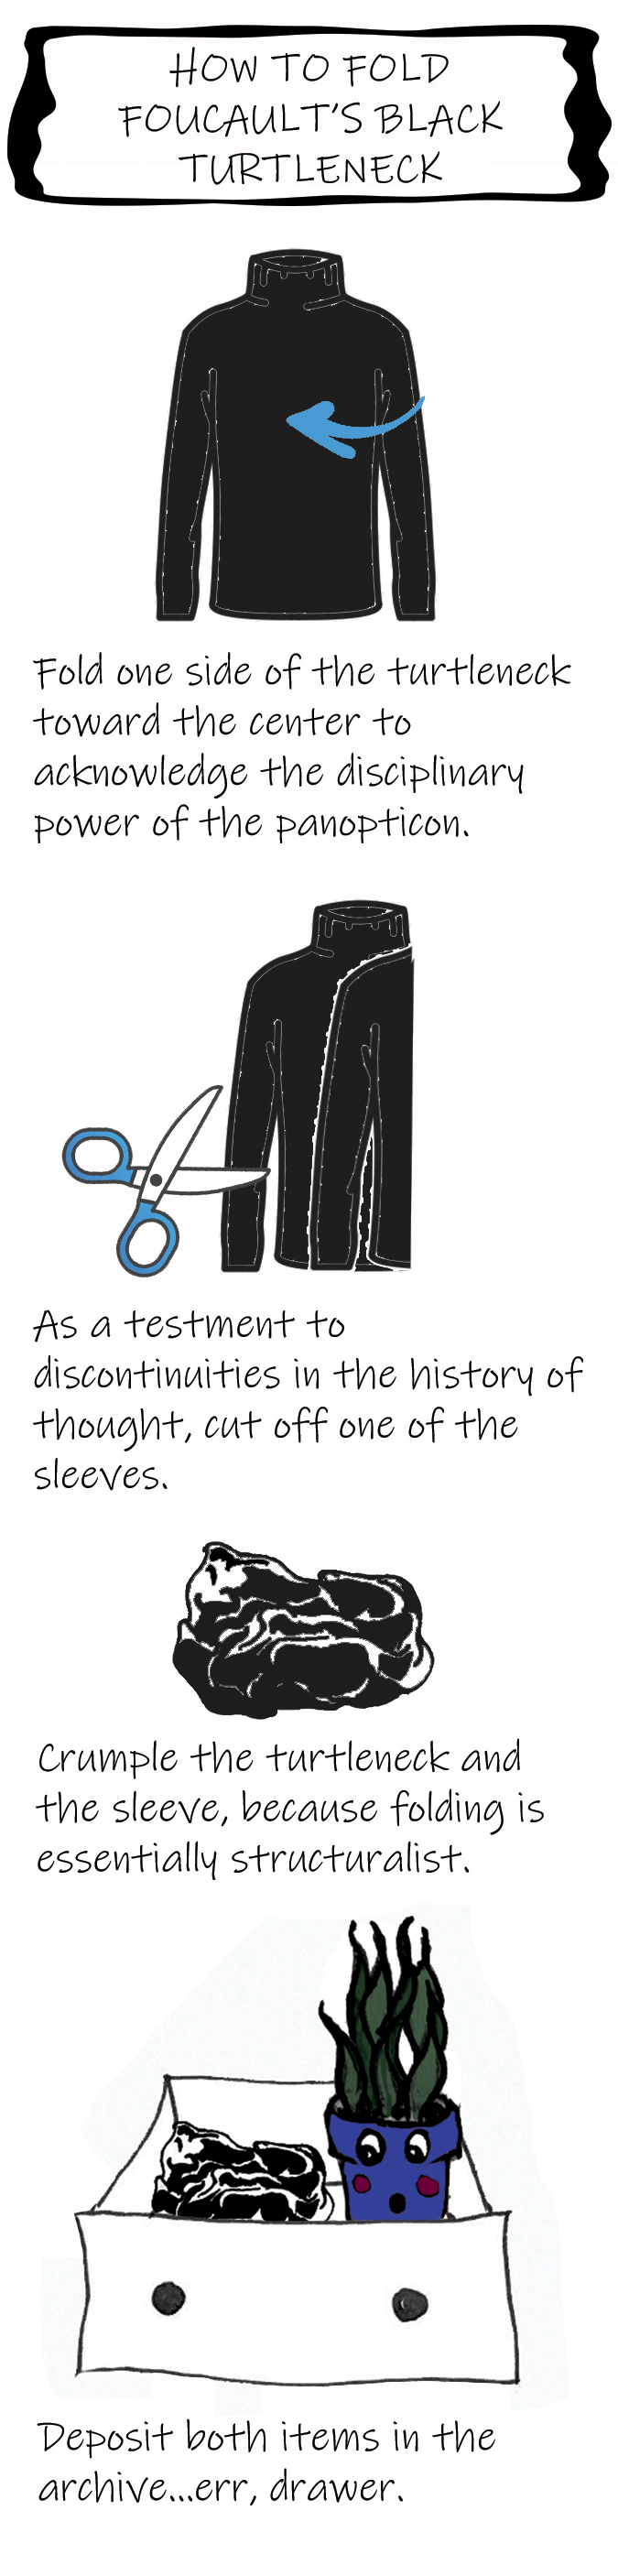 The four steps to folding Foucault's black turtleneck: 1) (an arrow points from the sleeve of a silhouette of a turtle neck to its center) Fold one side of the turtleneck toward the center to acknowledge the disciplinary power of the panopticon. 2) (a pair of scissors is about to but off on of the sleeves of the folded shirt) As a testament to discontinuities in the history of thought, cut off one of the sleeves. 3) (the shirt is not balled up) Crumple up the turtleneck and the sleeve, because folding is essentially structuralist. 4) (a dresser drawer contains the crumpled up shirt and an anthropomorphized potted house plant, which looks surprised with its eyes directed at the shirt.